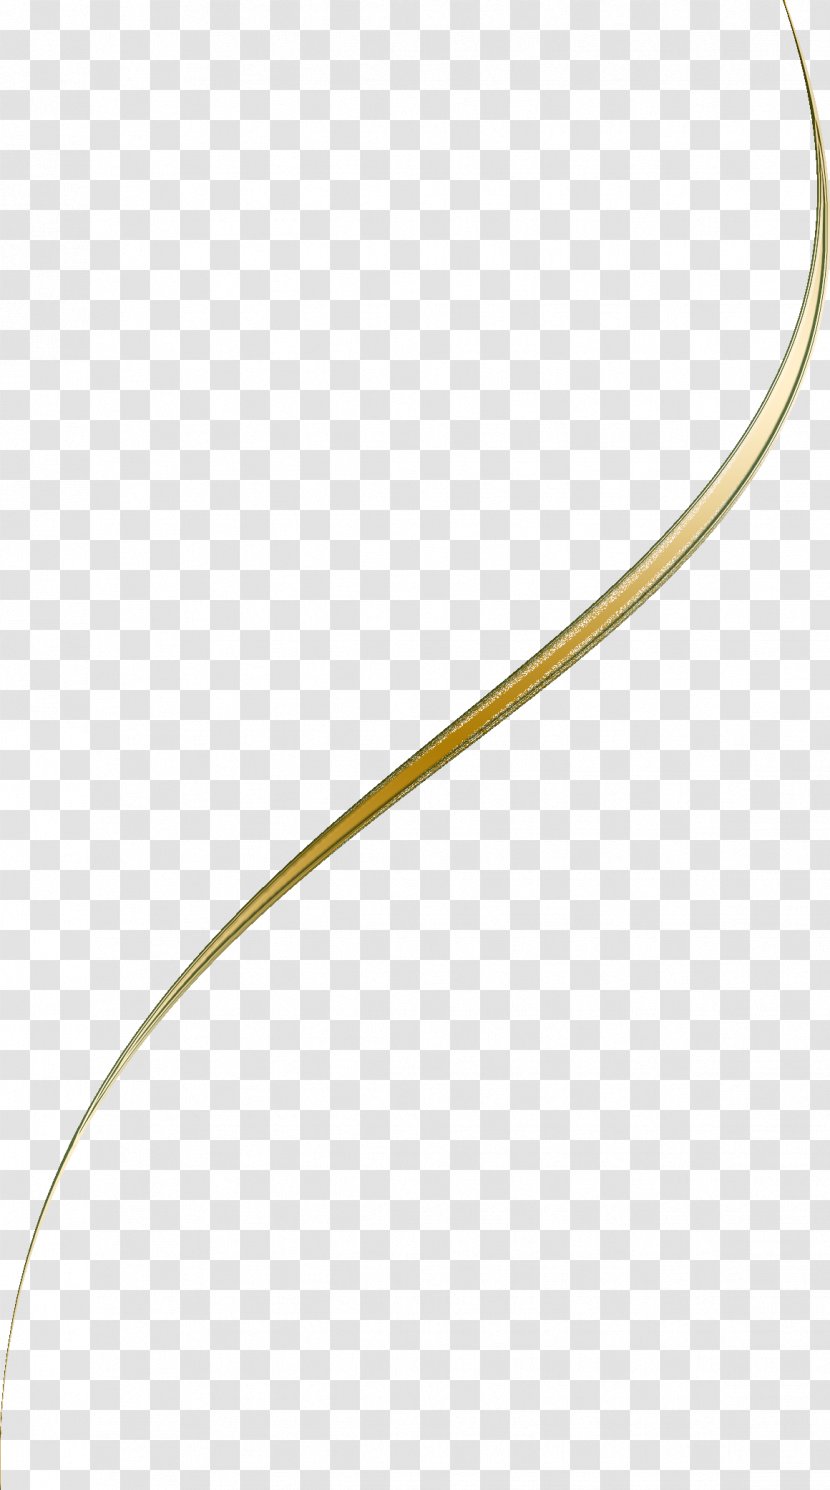 Body Jewellery - Jewelry - GOLD LINE Transparent PNG